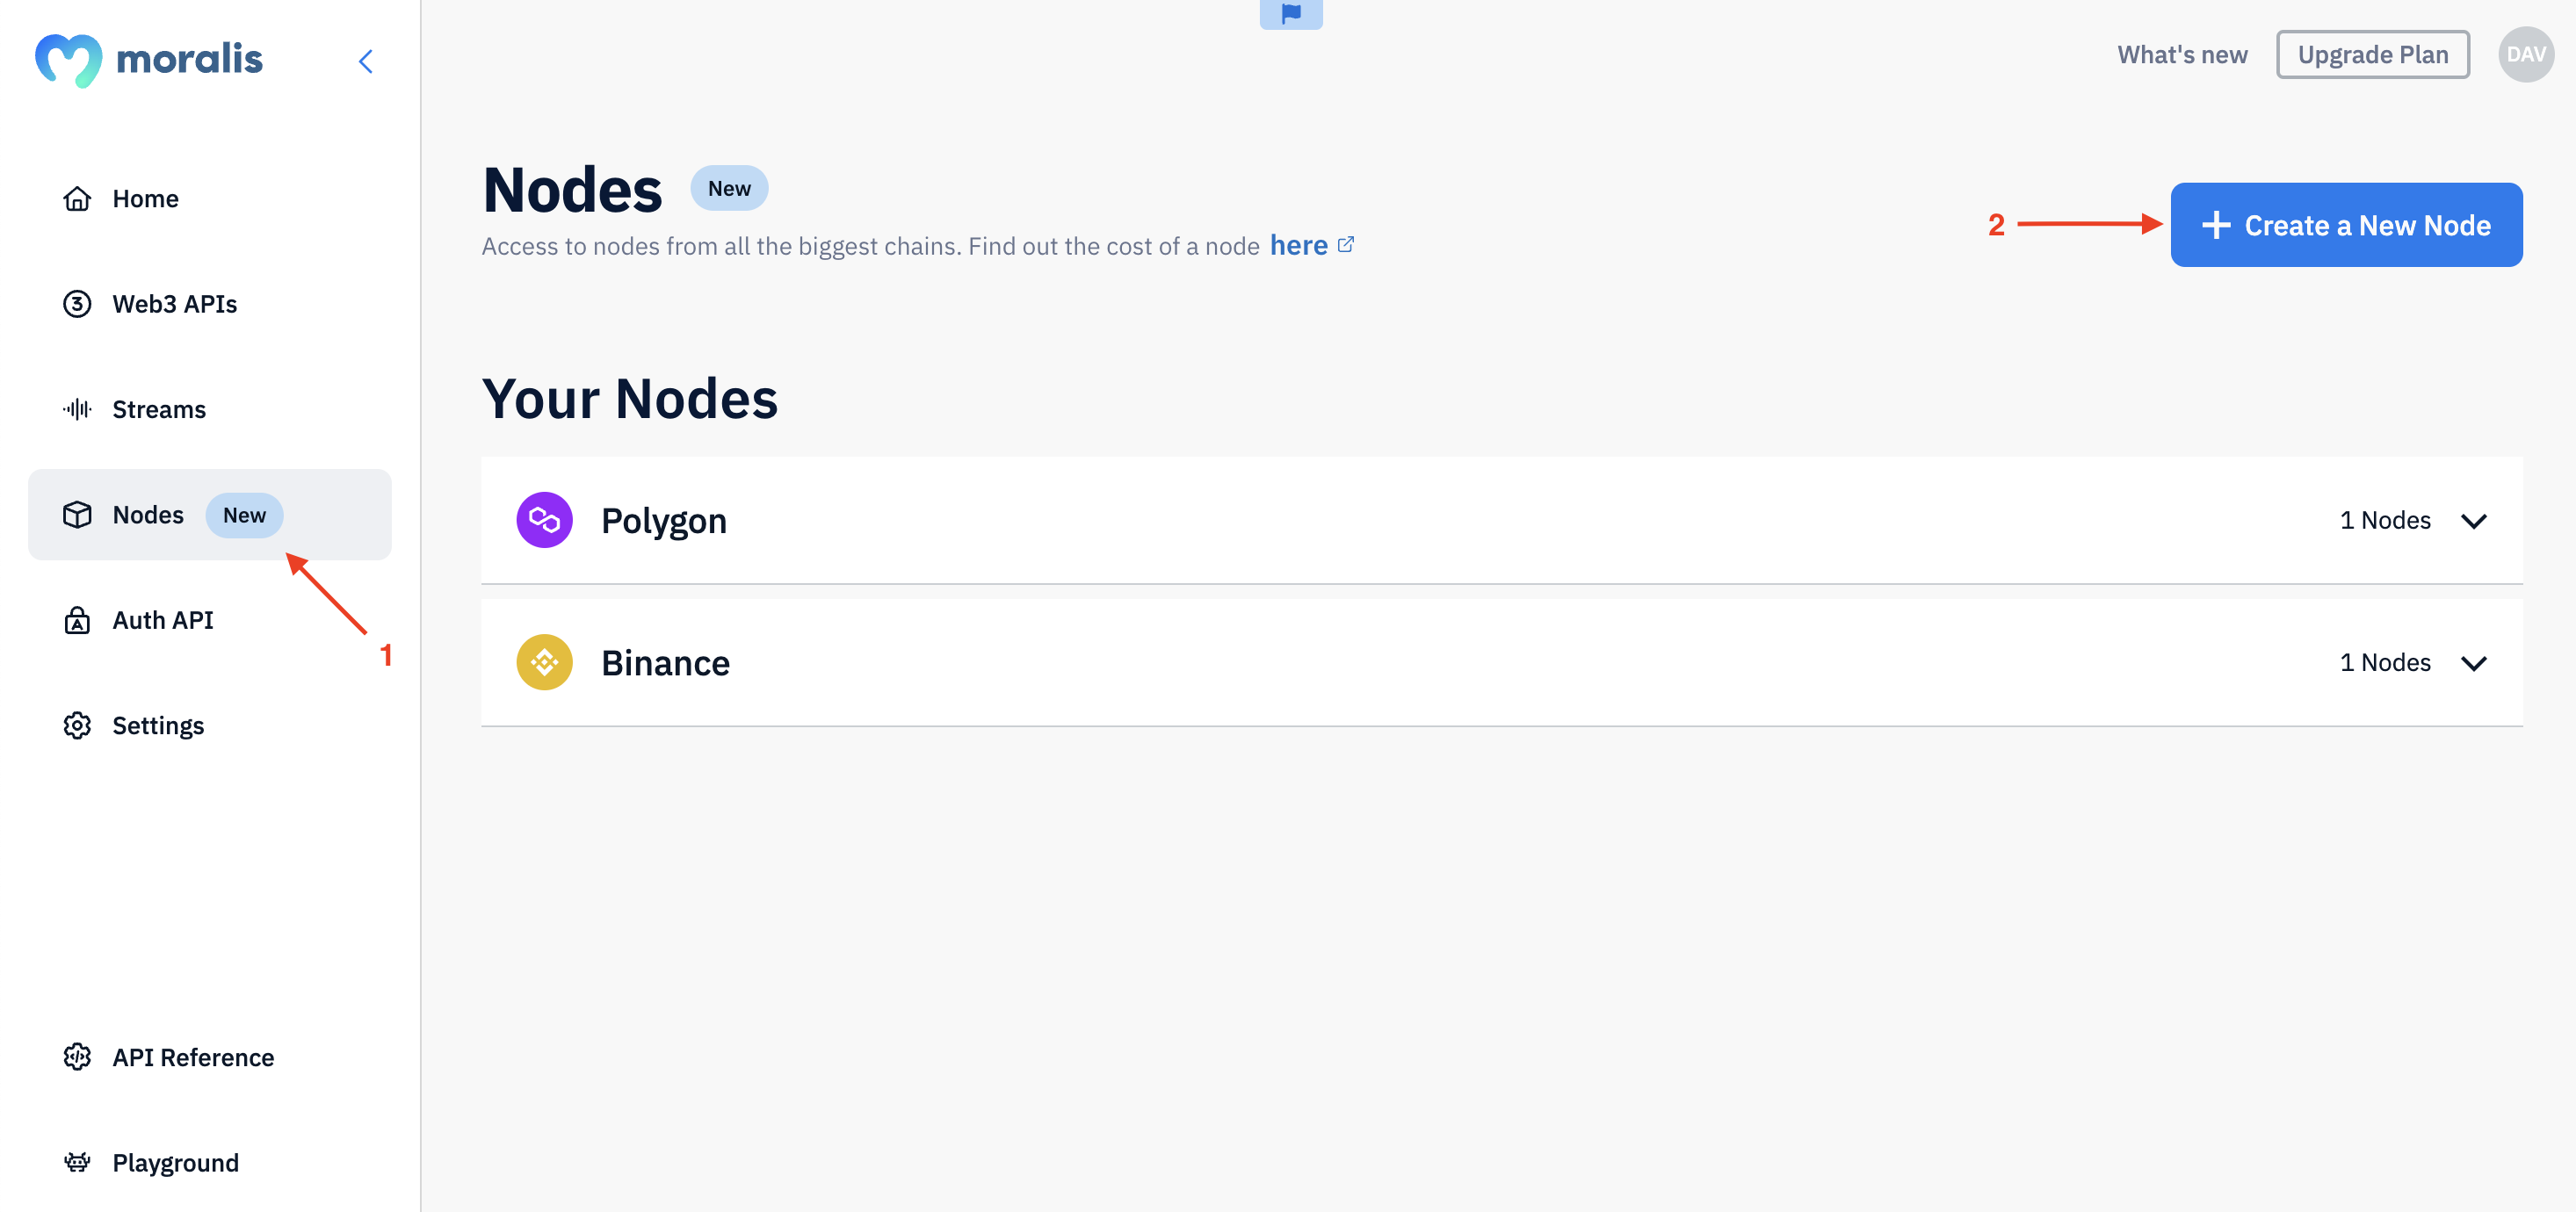 Showing Step 2 - Log in, go to the ”Nodes” tab, click on the ”+ Create a New Node” button, and set up your node: 